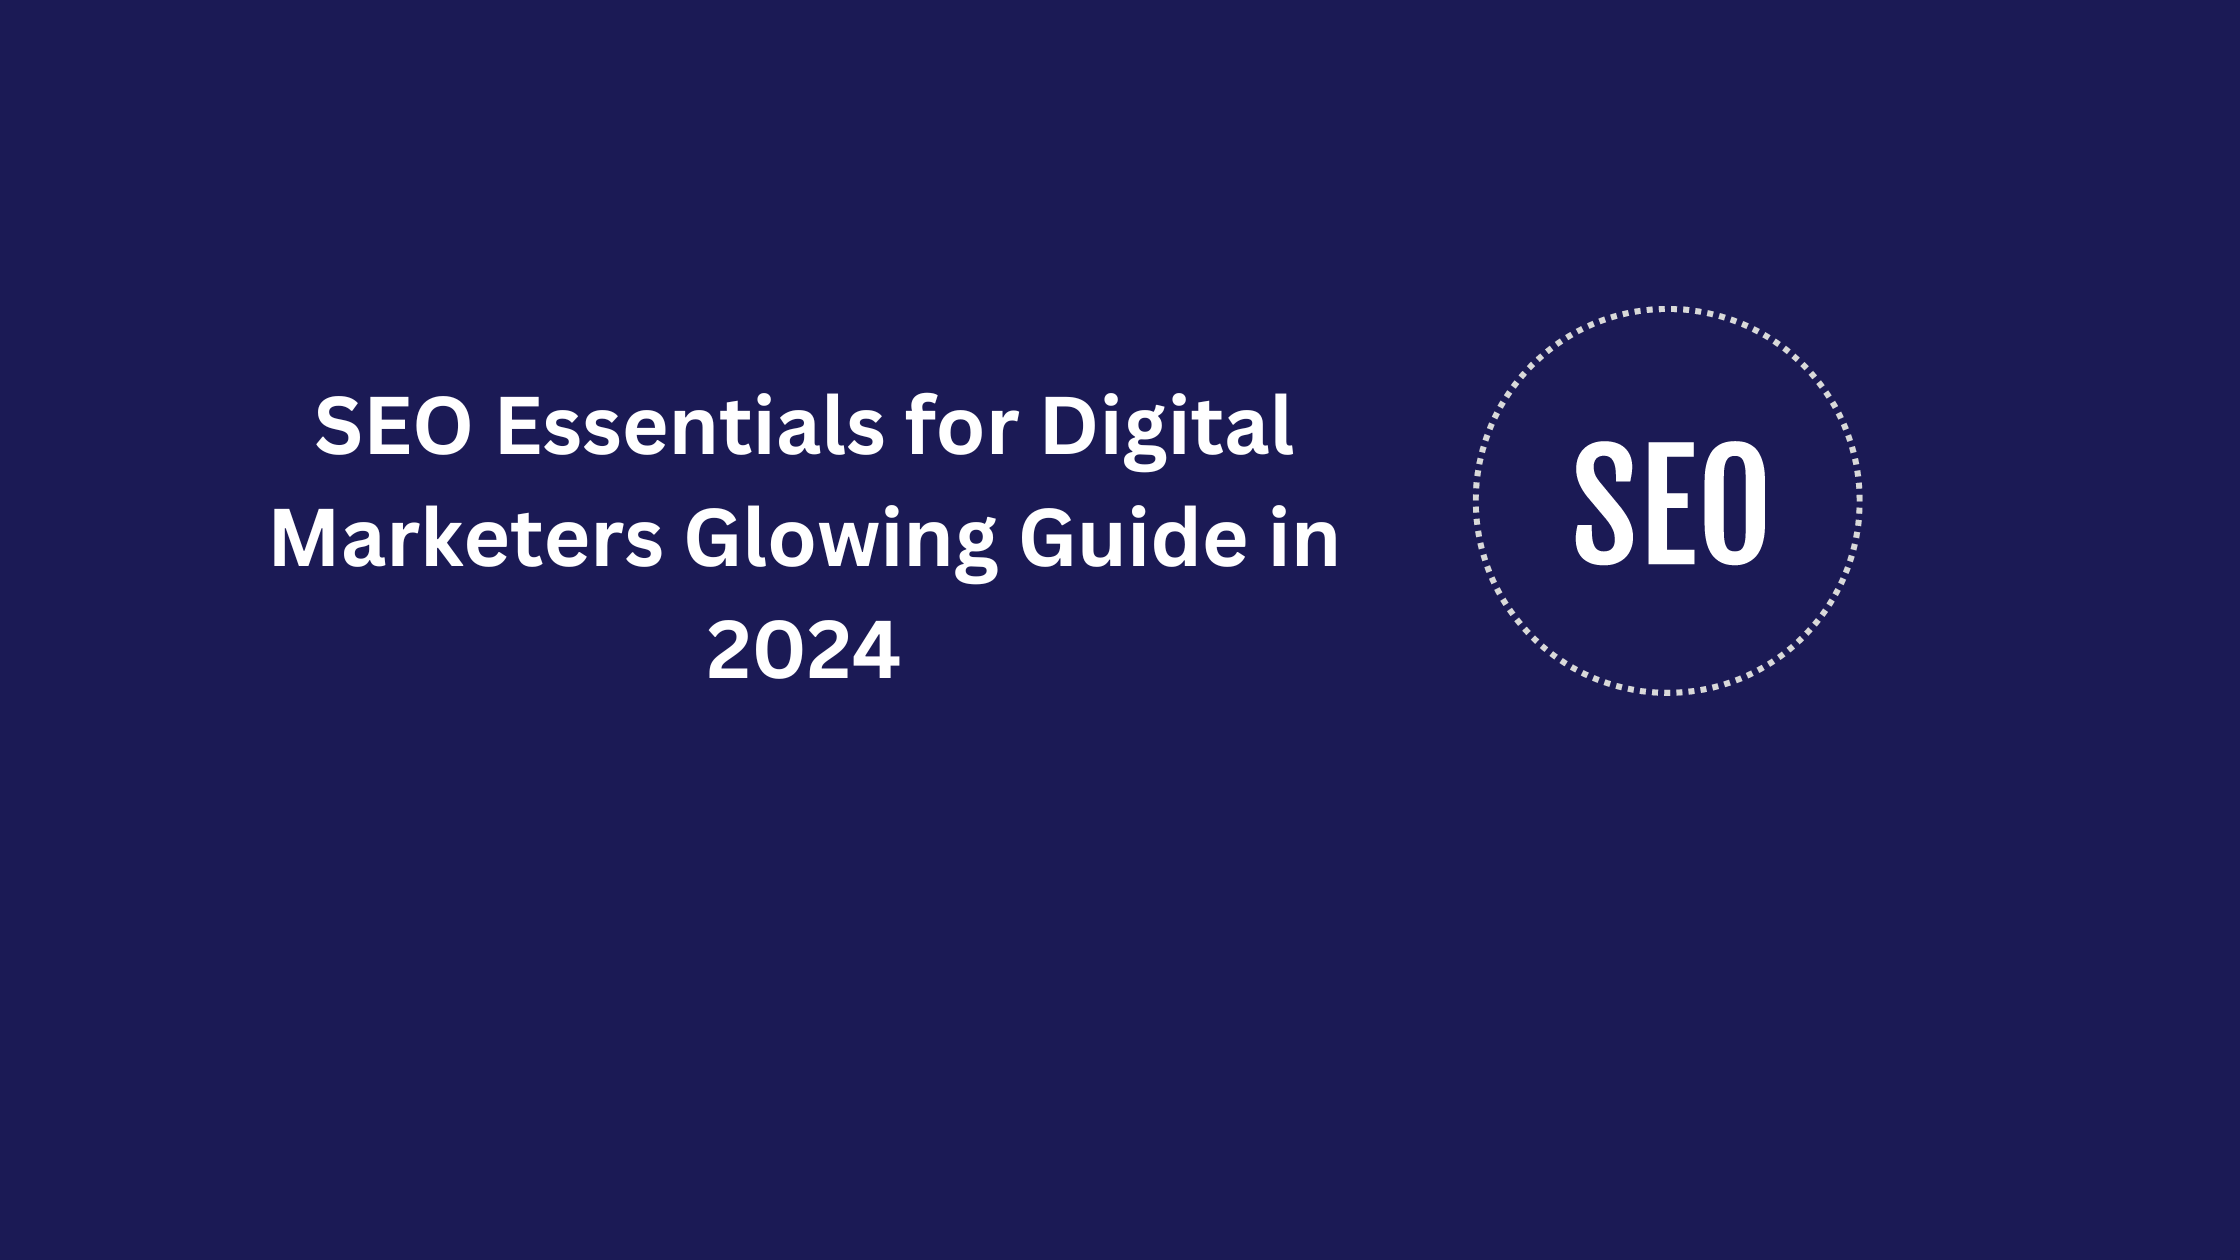 SEO Essentials for Digital Marketers Glowing Guide in 2024